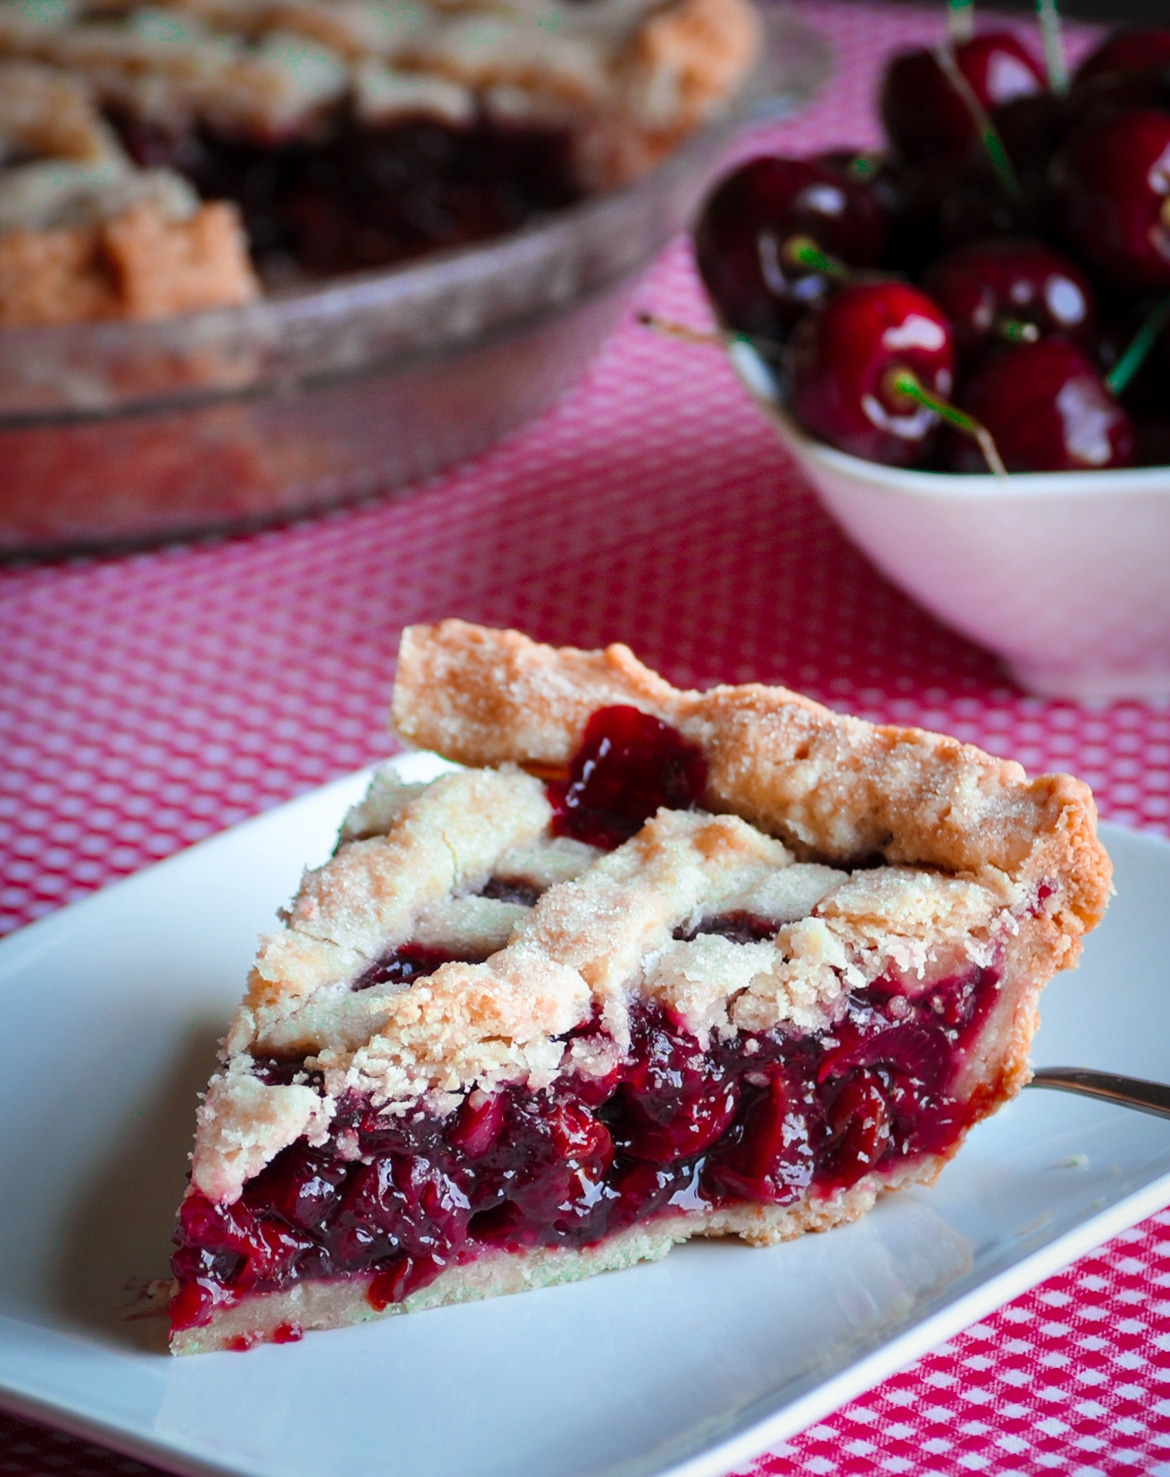 A slice of triple cherry pie on a plate, ready to eat.